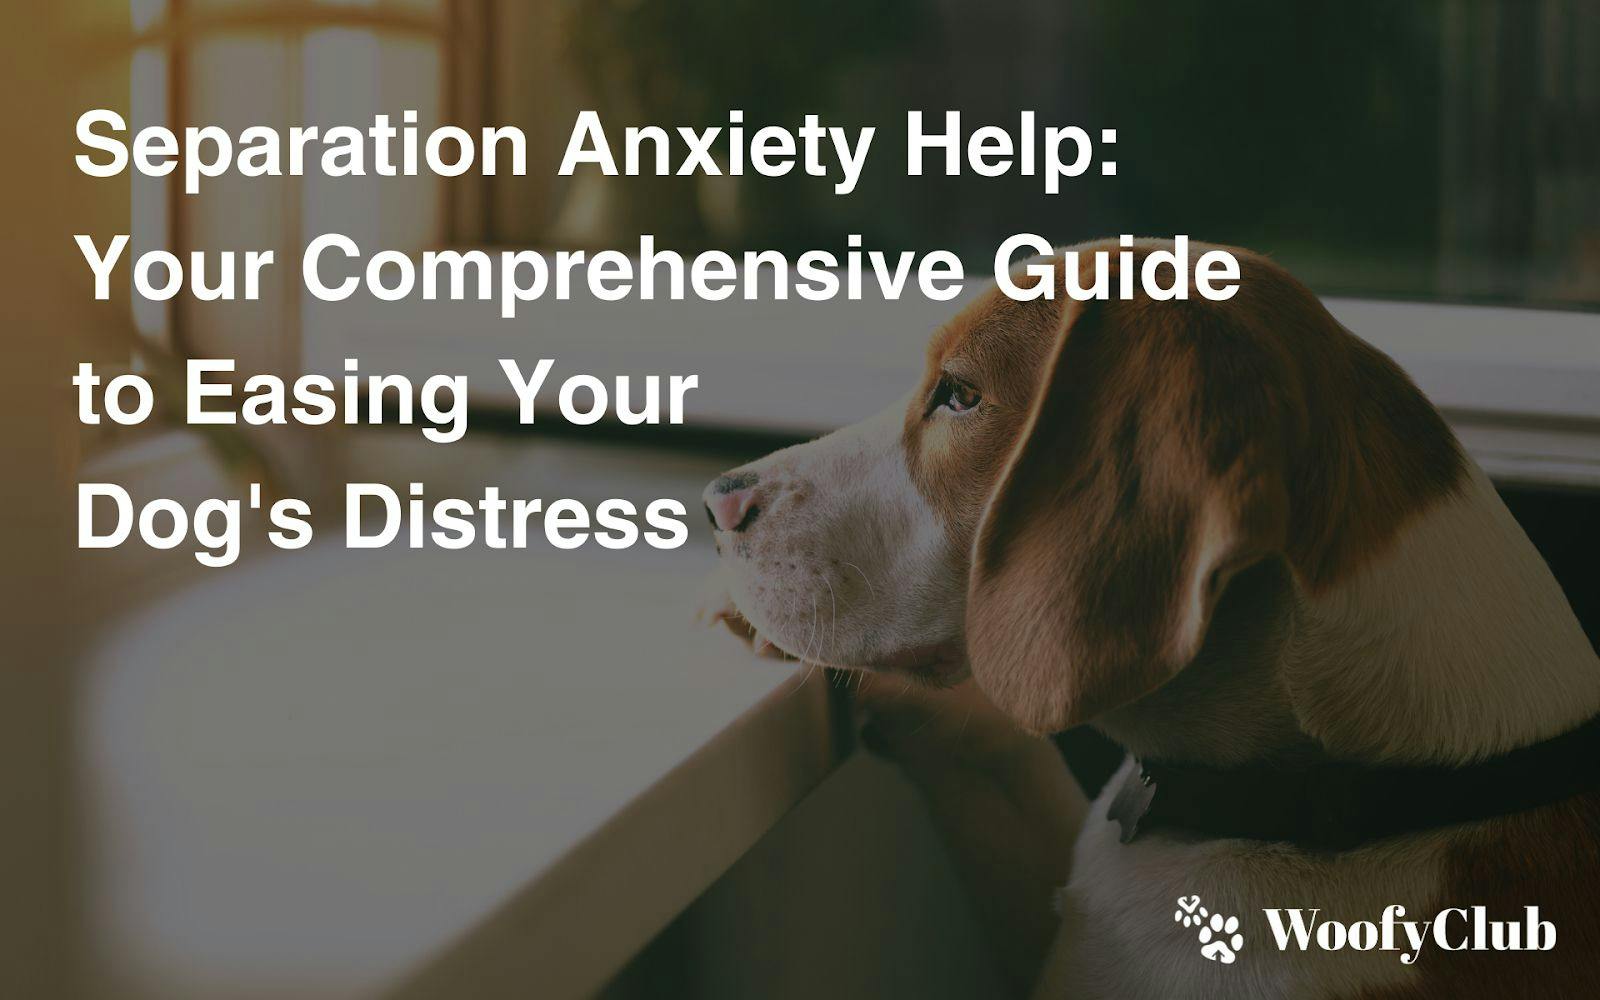 Separation Anxiety Help: Your Comprehensive Guide To Easing Your Dog's Distress